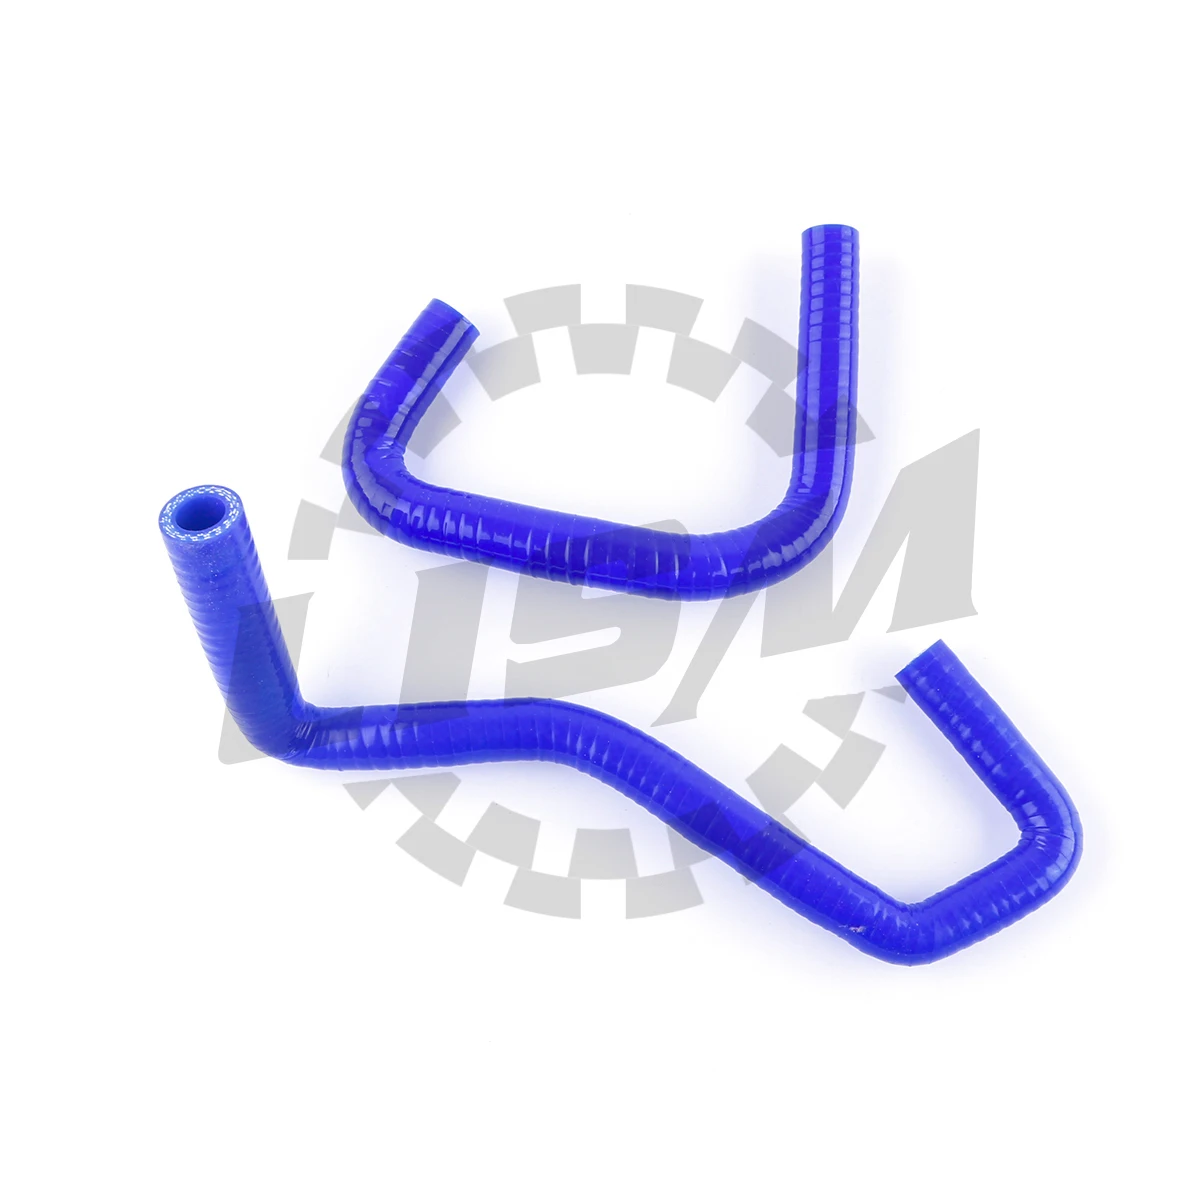 

2PCS For 1985-1996 Renault 5GT Turbo 3-PLY Main Water Silicone Coolant Hose 1986 1987 1988 1989 1990 1991 1992 1993 1994 1995